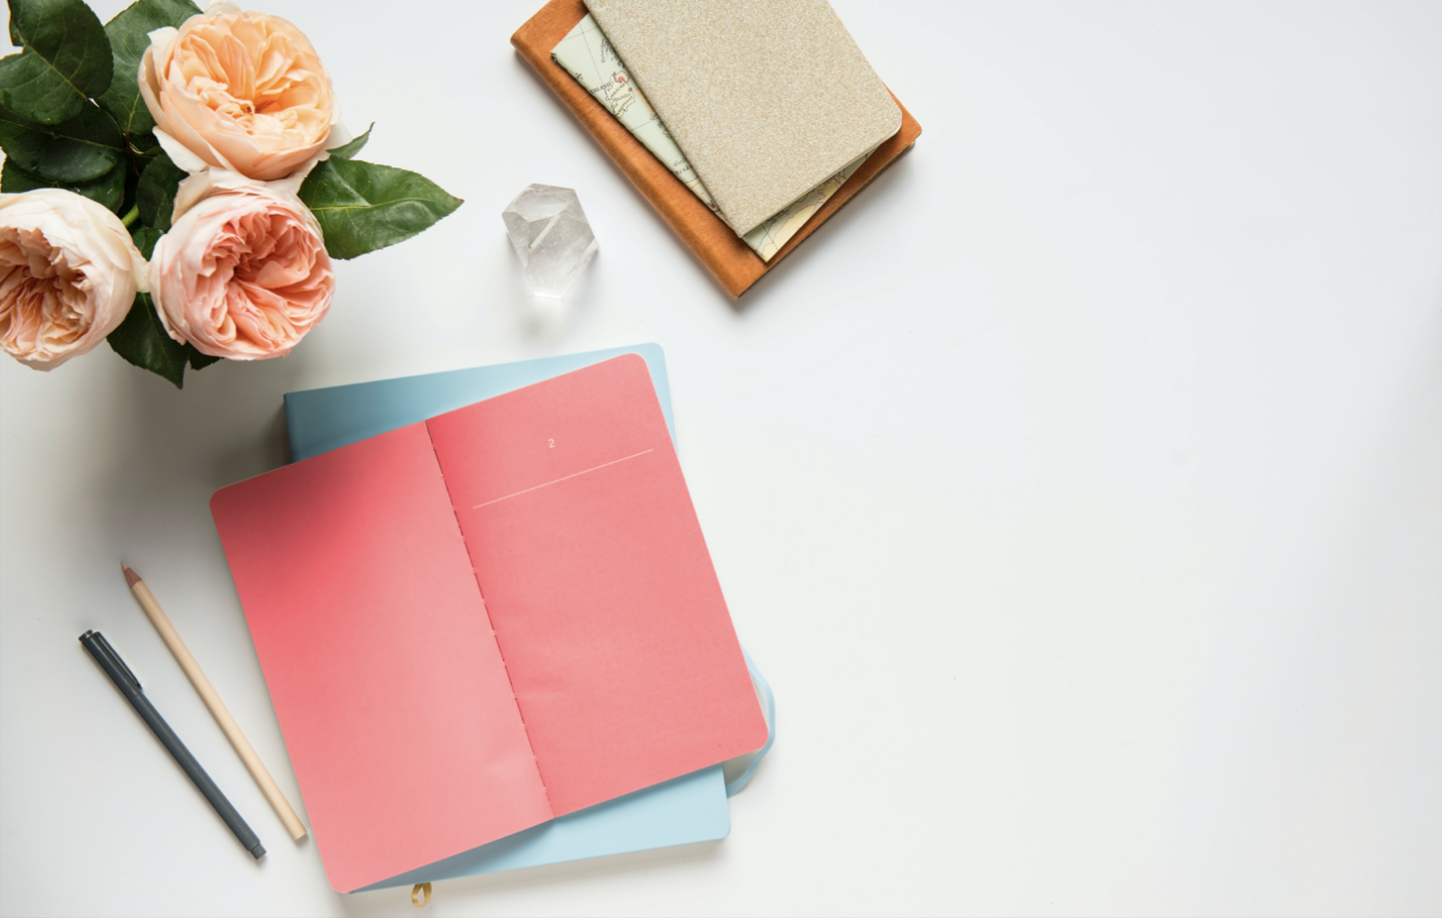 Top-down view of colorful notebooks and a vase of peonies on a light-gray desk